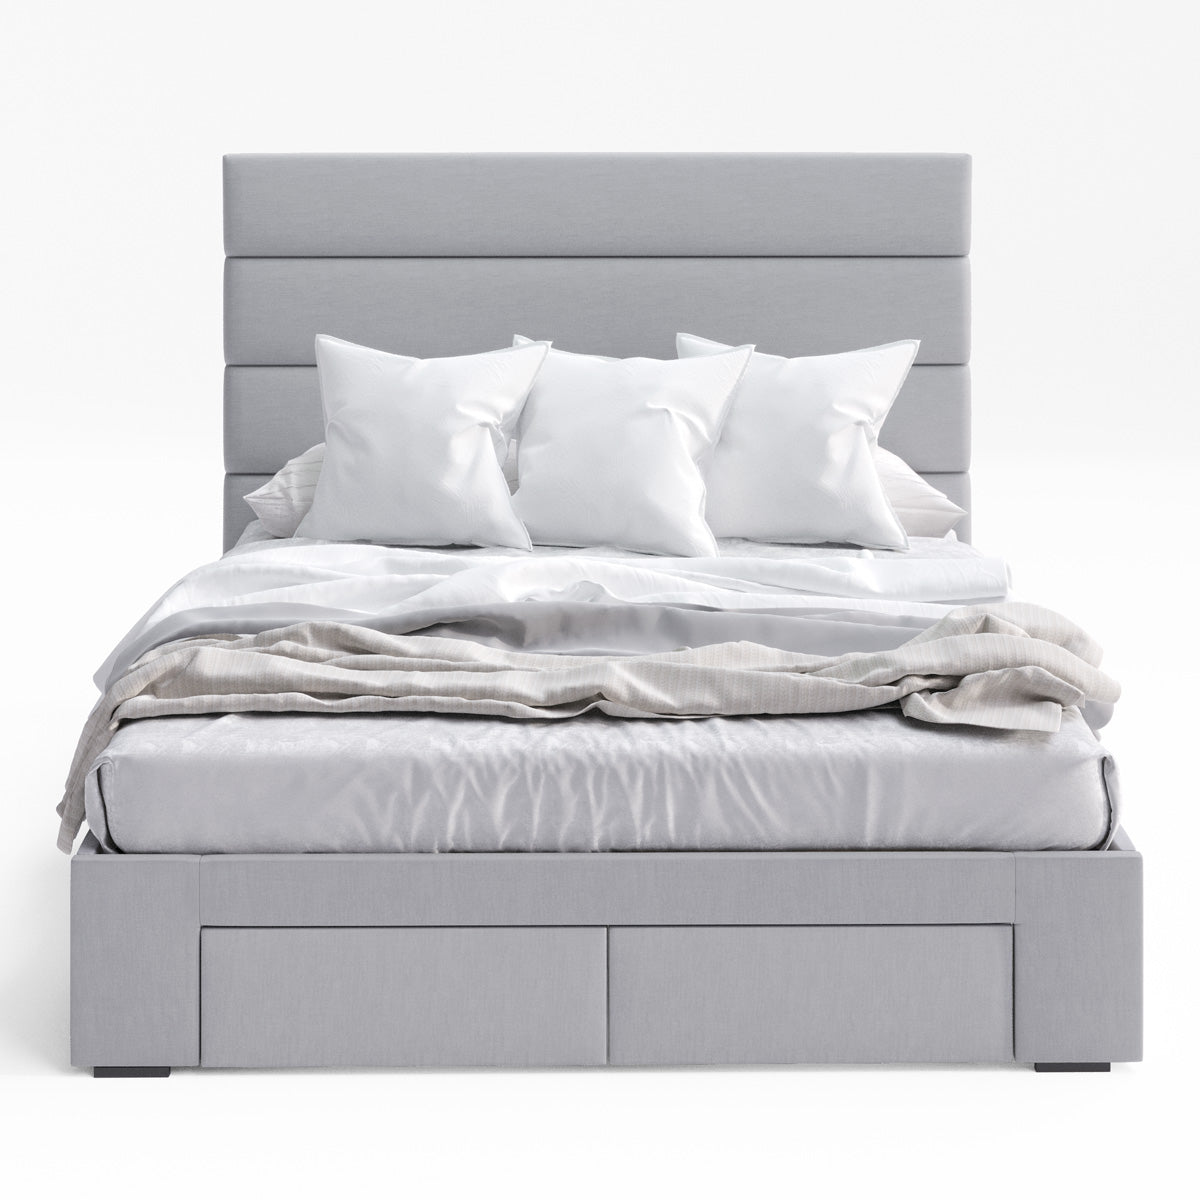 Benny Bed Frame with Four Storage Drawers (Grey Fabric)